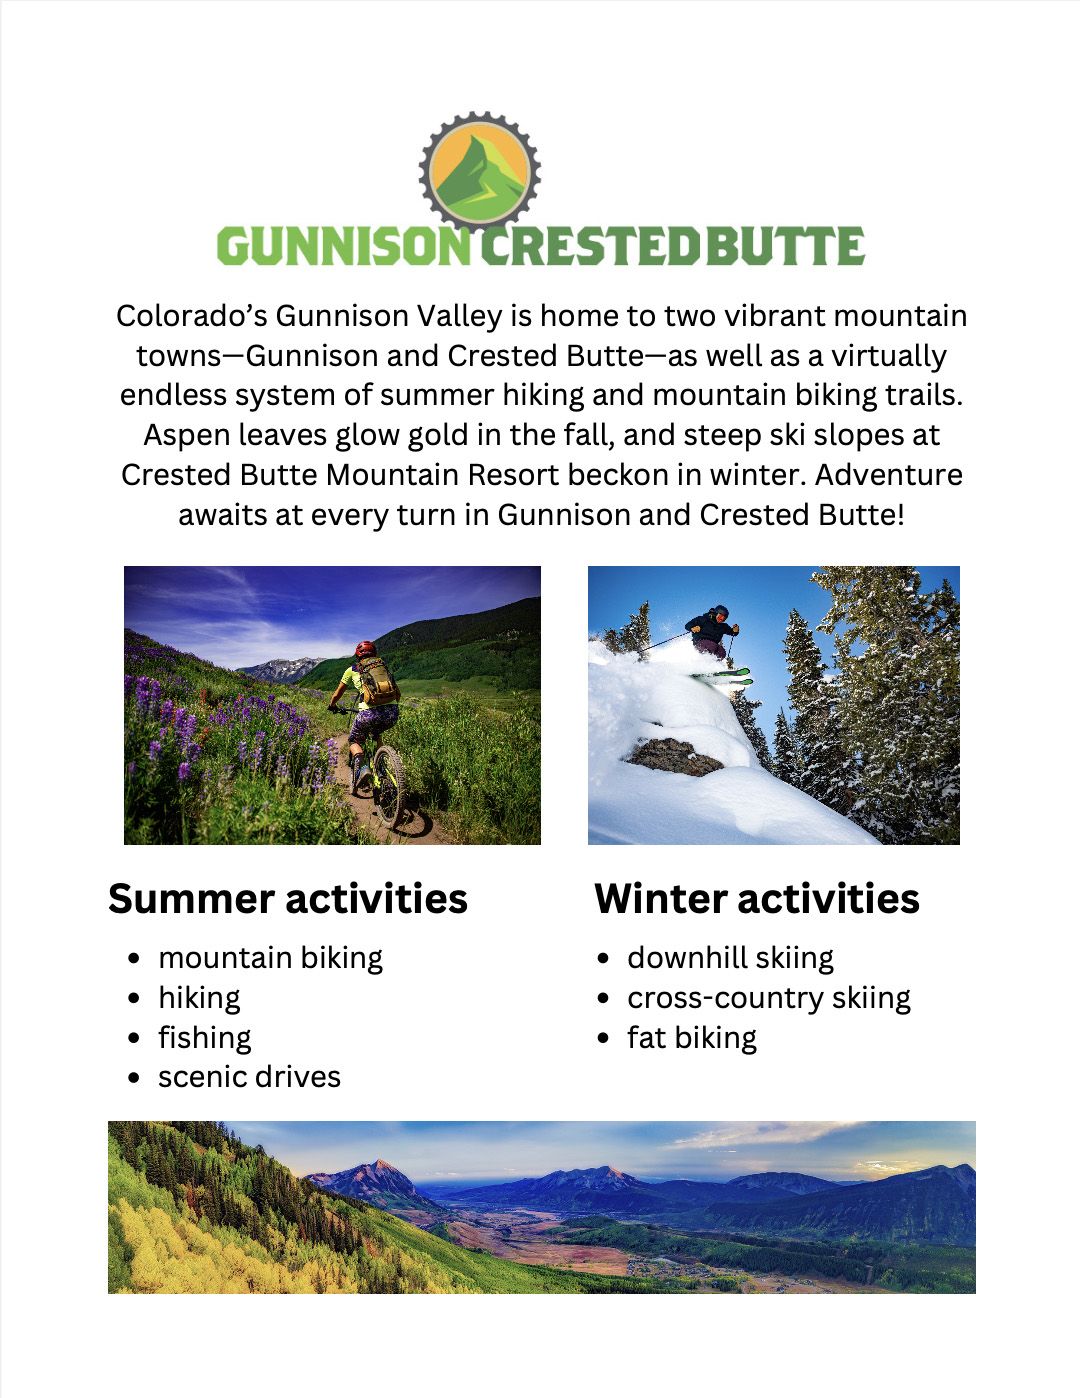 One-pager flyer for the Gunnison Crested Butte area.